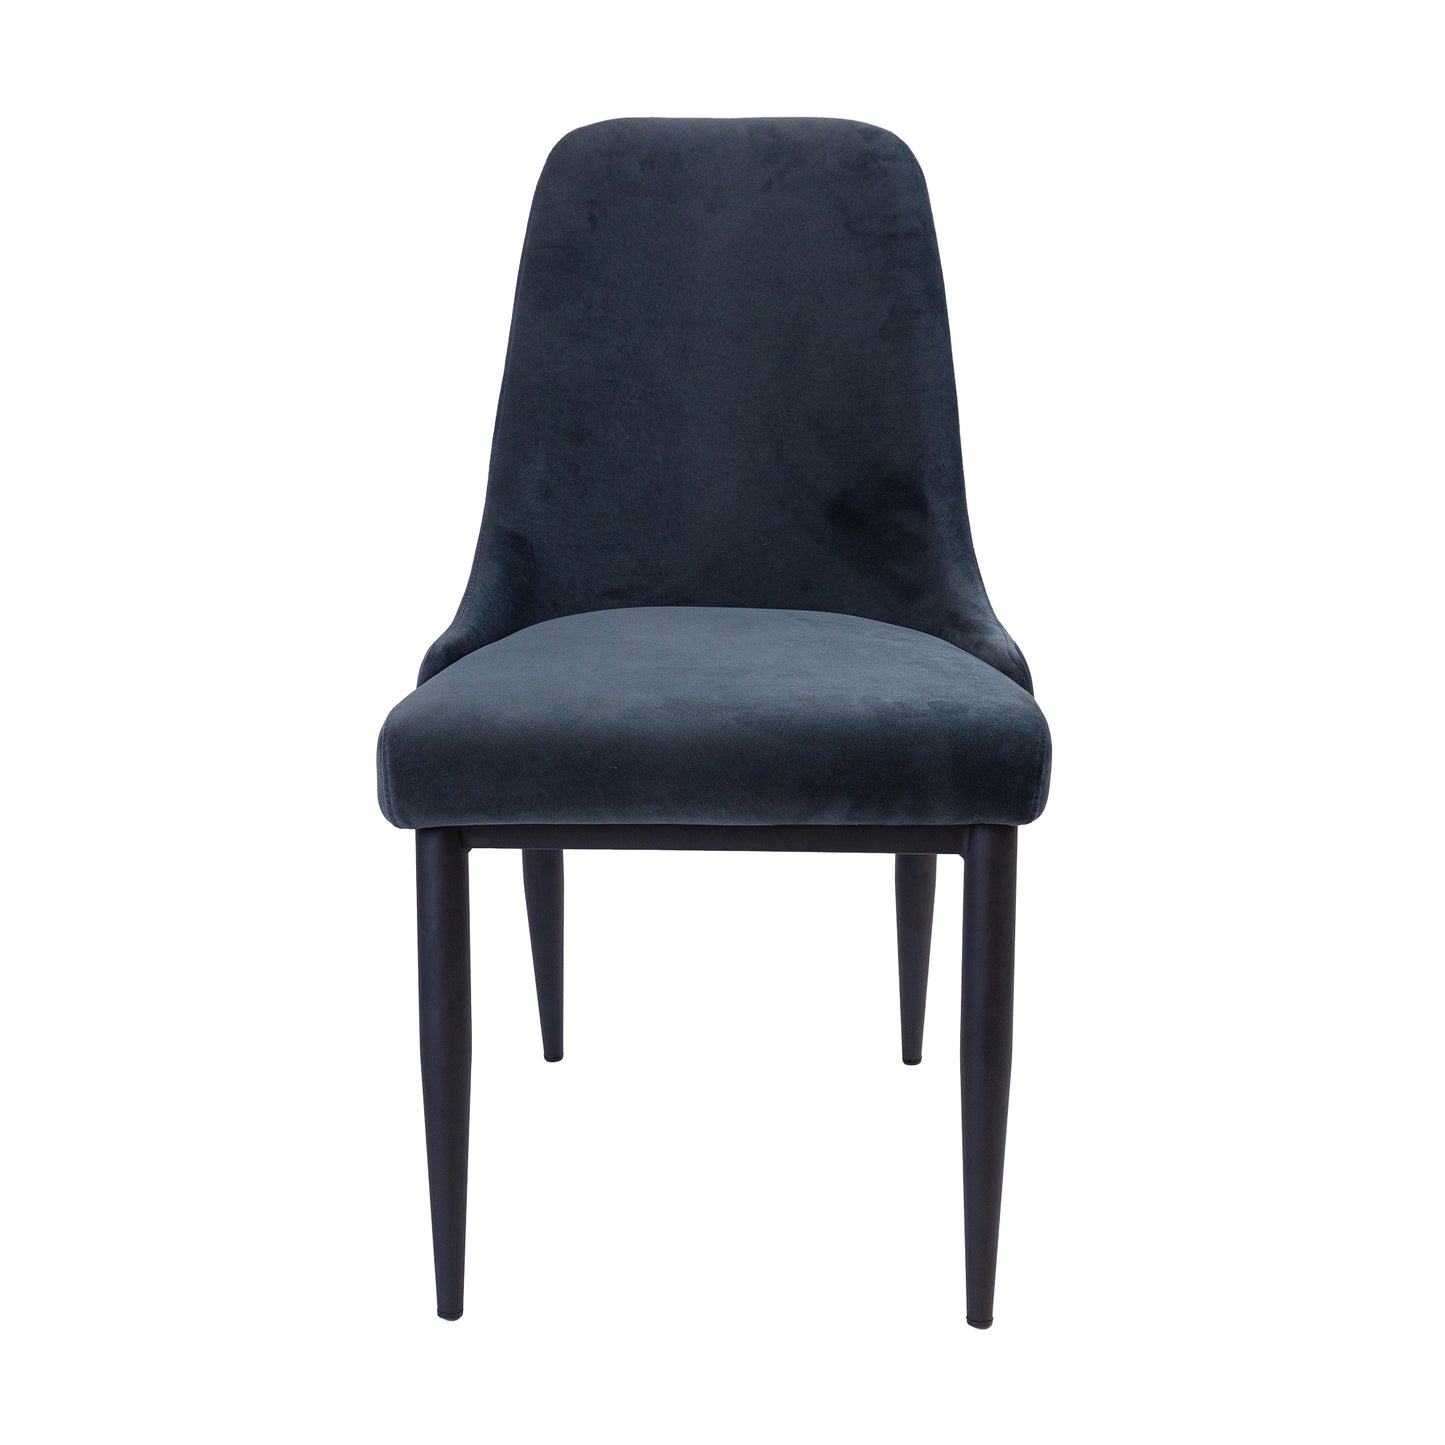 Eva Dining Chair Set of 6 Fabric Seat with Metal Frame - Charcoal